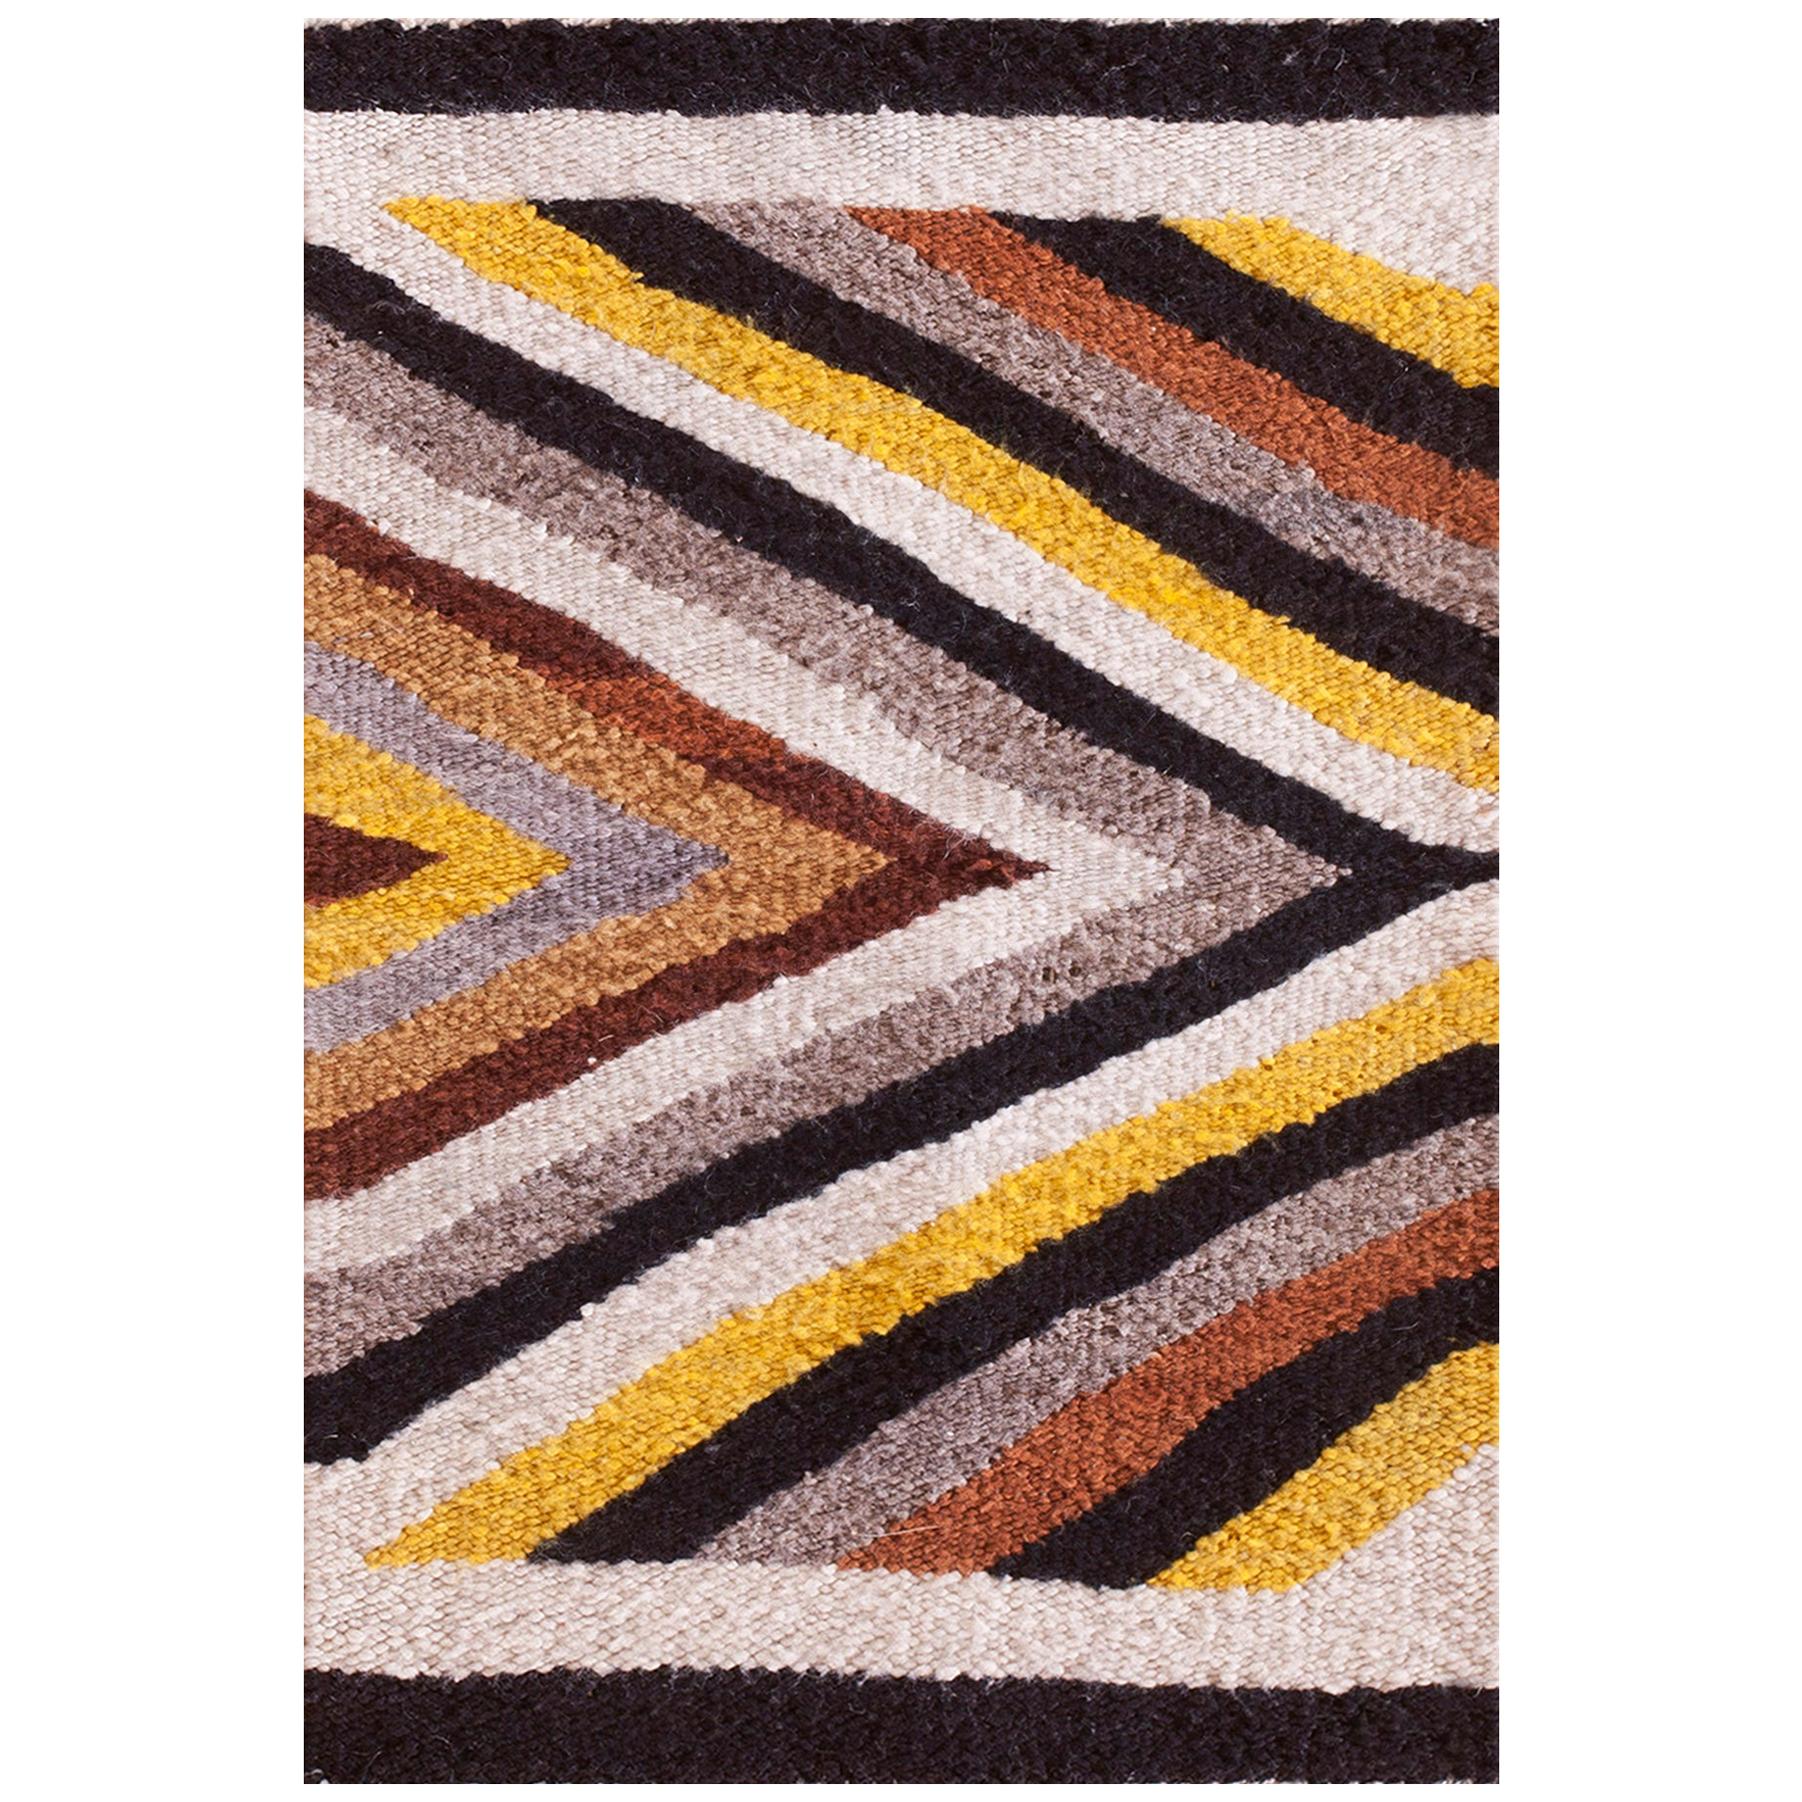 Mid 20th Century American Navajo Rug ( 1'4" x 2'6" - 41 x 62 ) For Sale